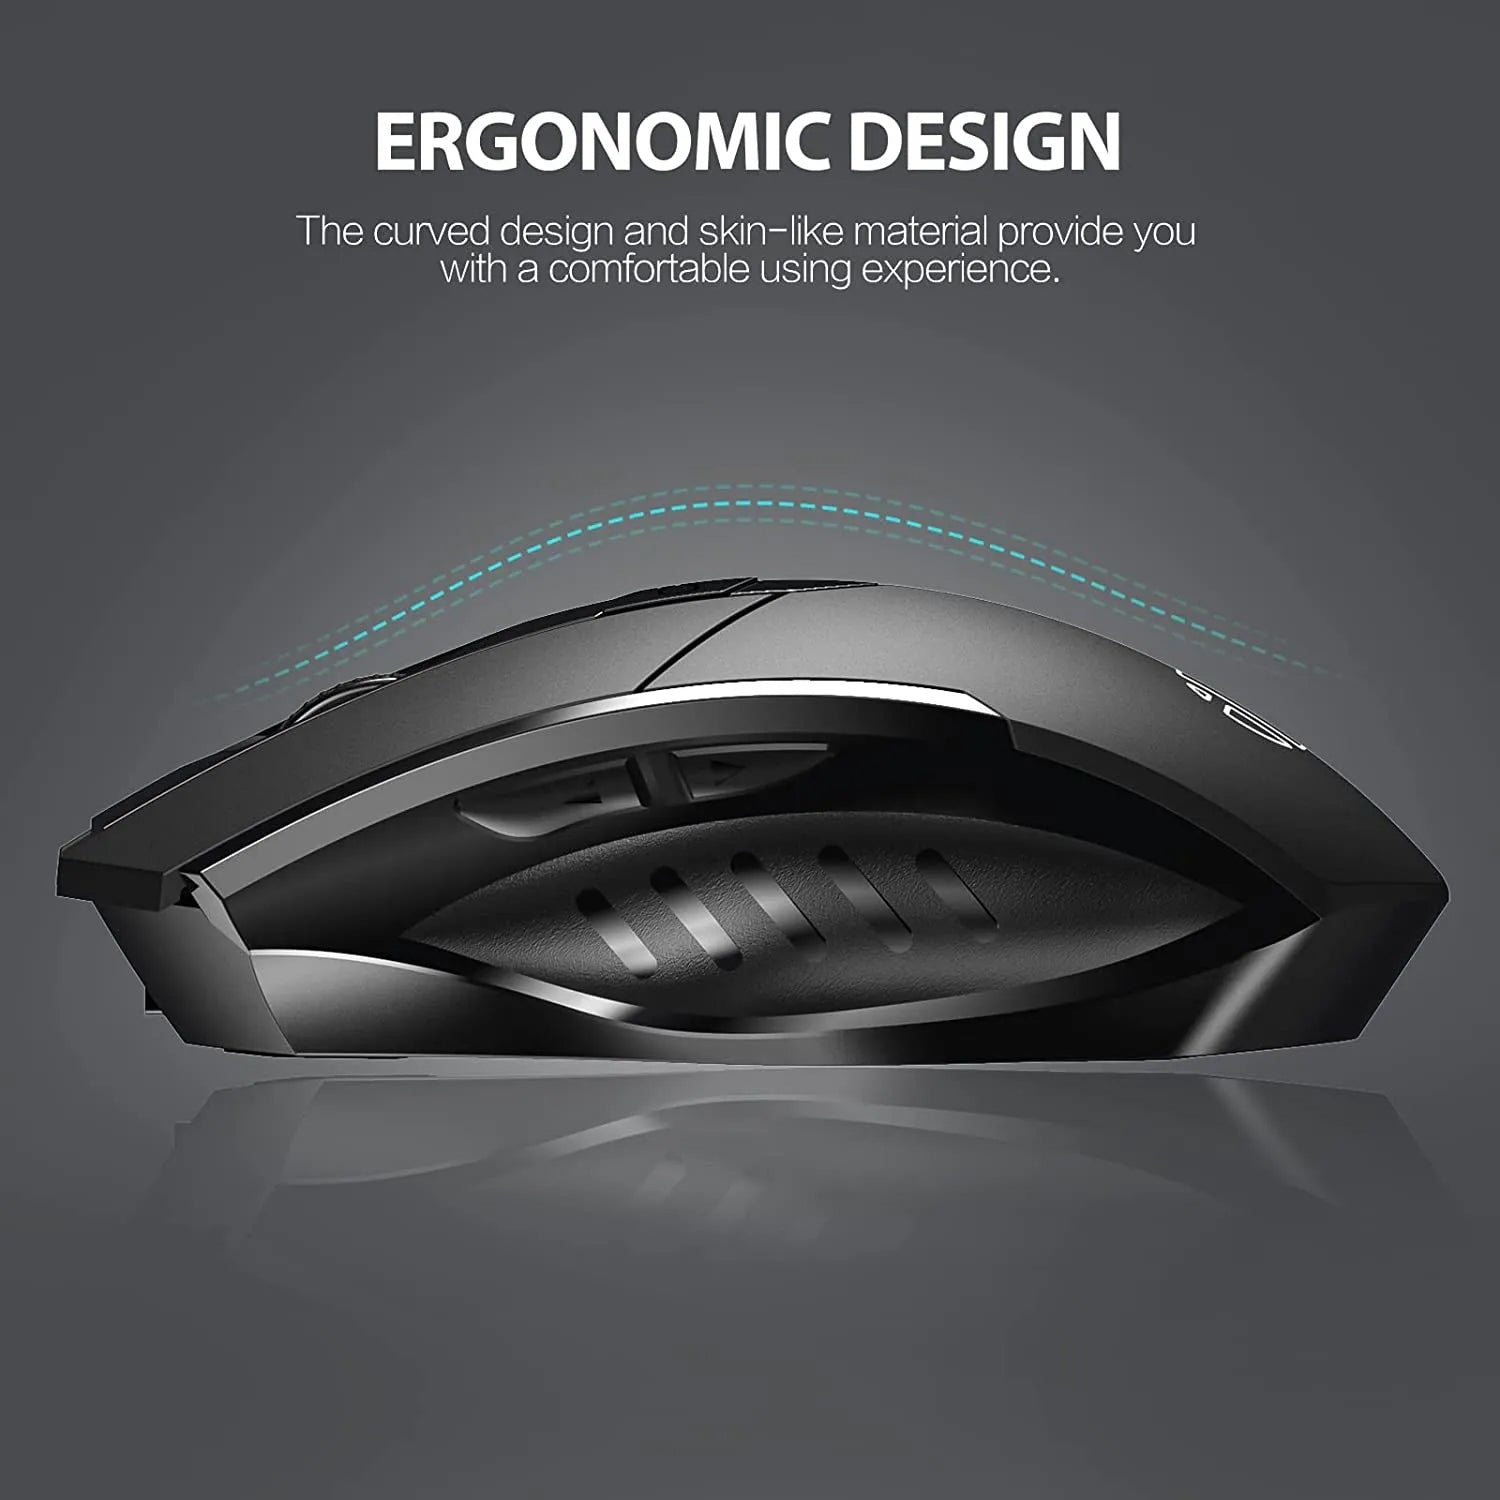 O2W SELECTION INPHIC A1 Wireless Triple Mode Bluetooth Silent Mouse